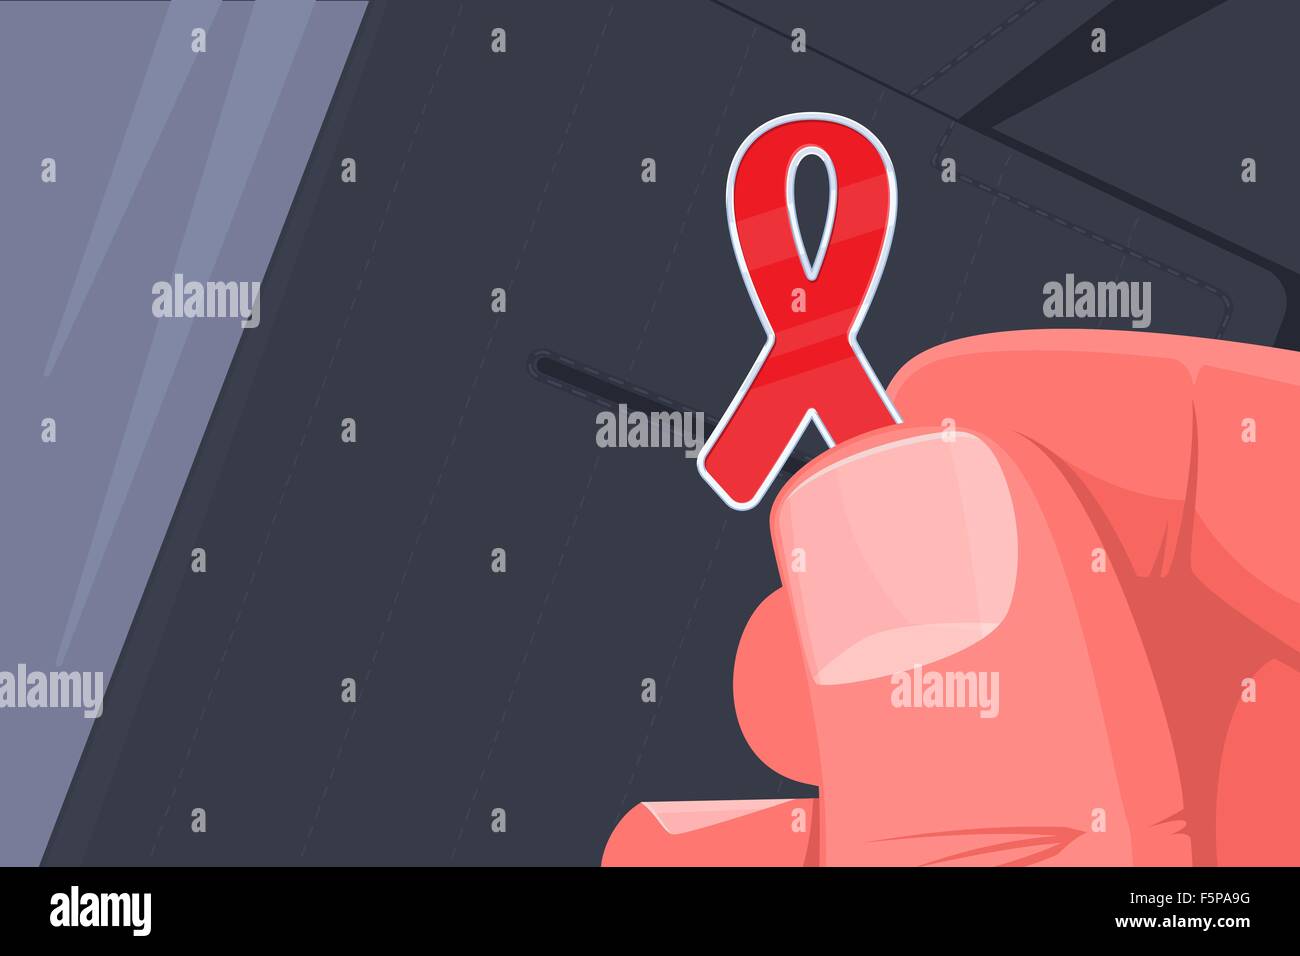 Human hand placing AIDS awareness ribbon badge on the suit jacket lapel. World AIDS day concept illustration. Stock Vector